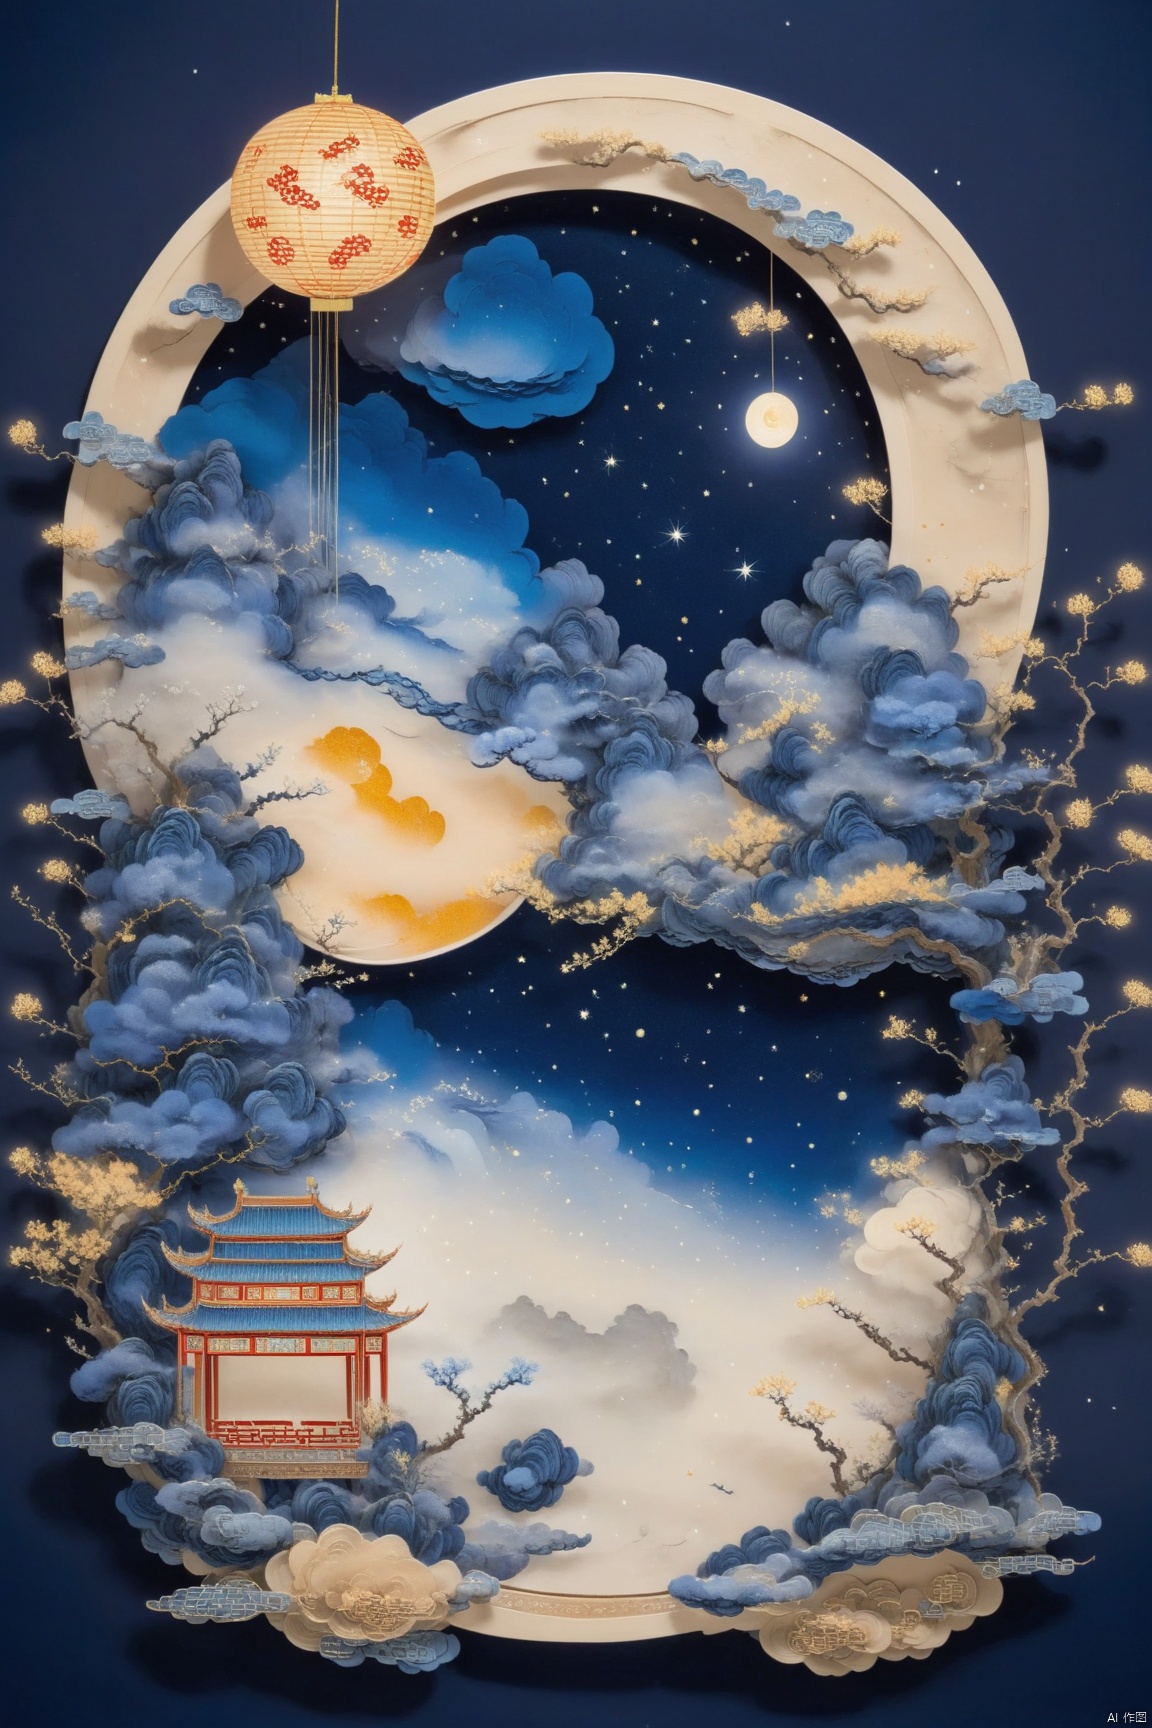  a drawing of a starry night and the moon, chinese wind painting,Isometric,outside border, Multi color matching,in the style of dreamy, romanticized cityscapes, influenced by ancient chinese art, luminous spheres, dusty piles, intricate storytelling, firecore, dreamscape portraiture,by Mitsumasa Anno